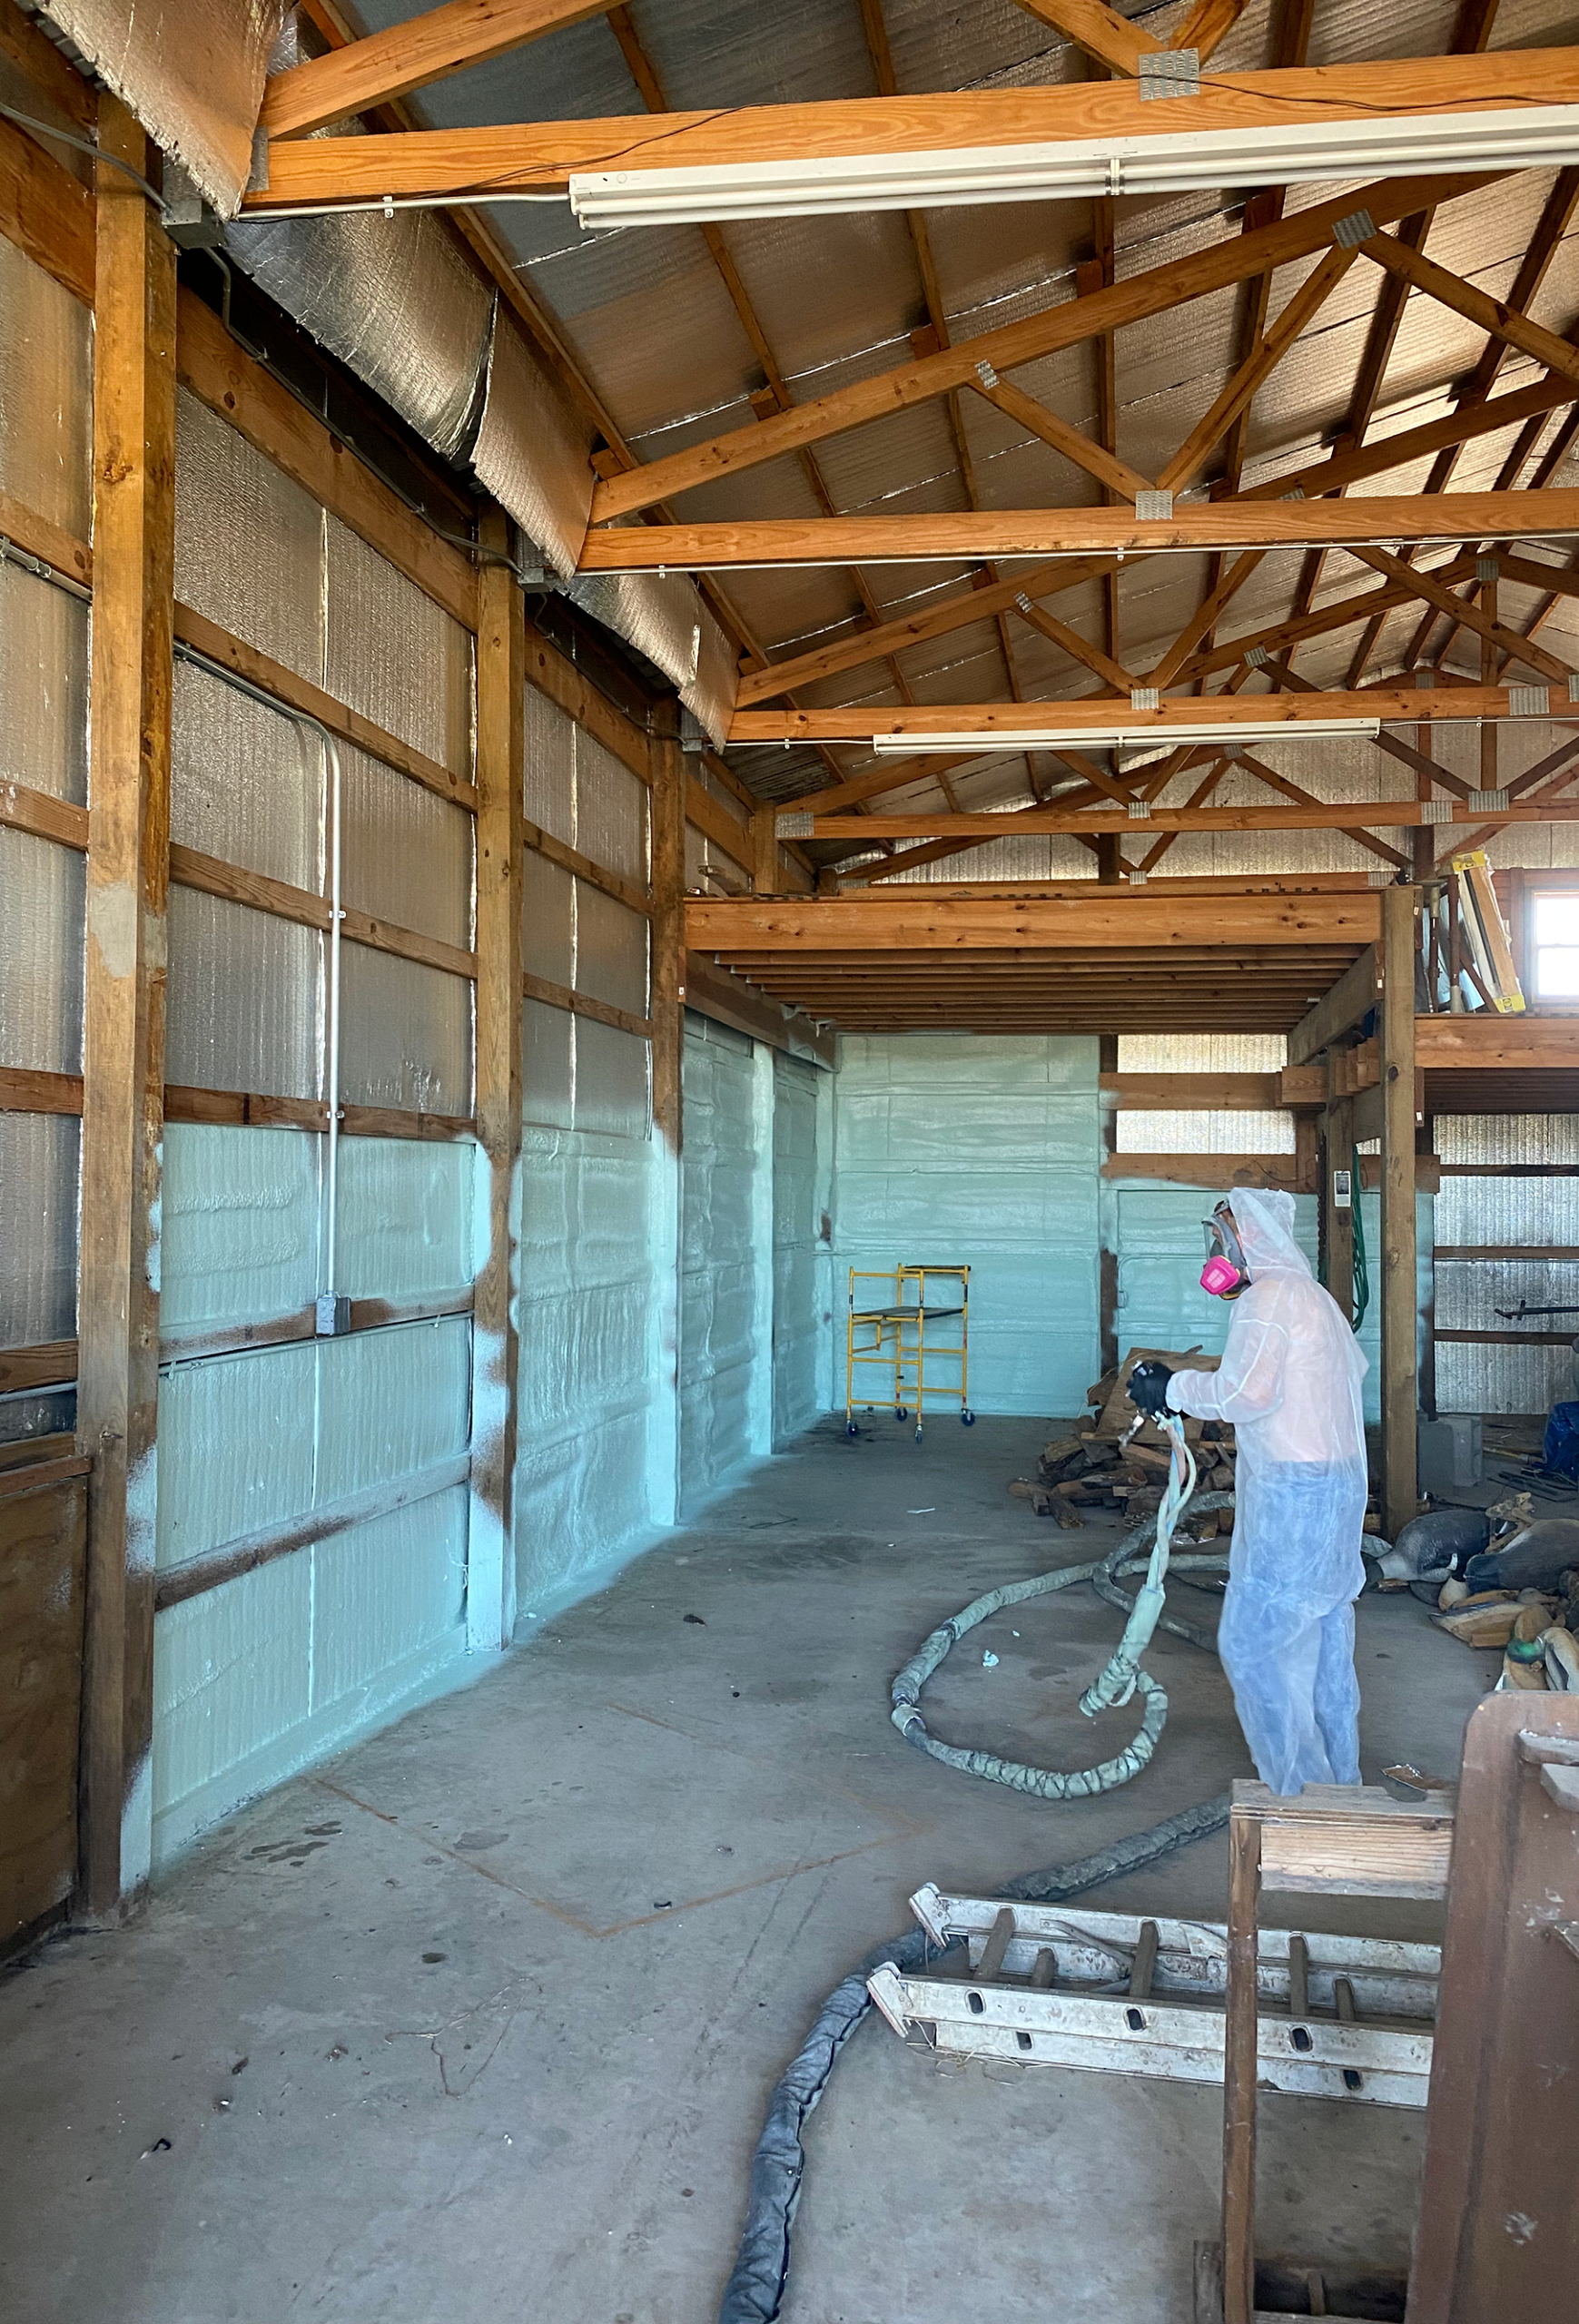 Install Spray Foam Insulation With DK Spray Foam & Insulation in Moberly, MO. Call Our Contractors.